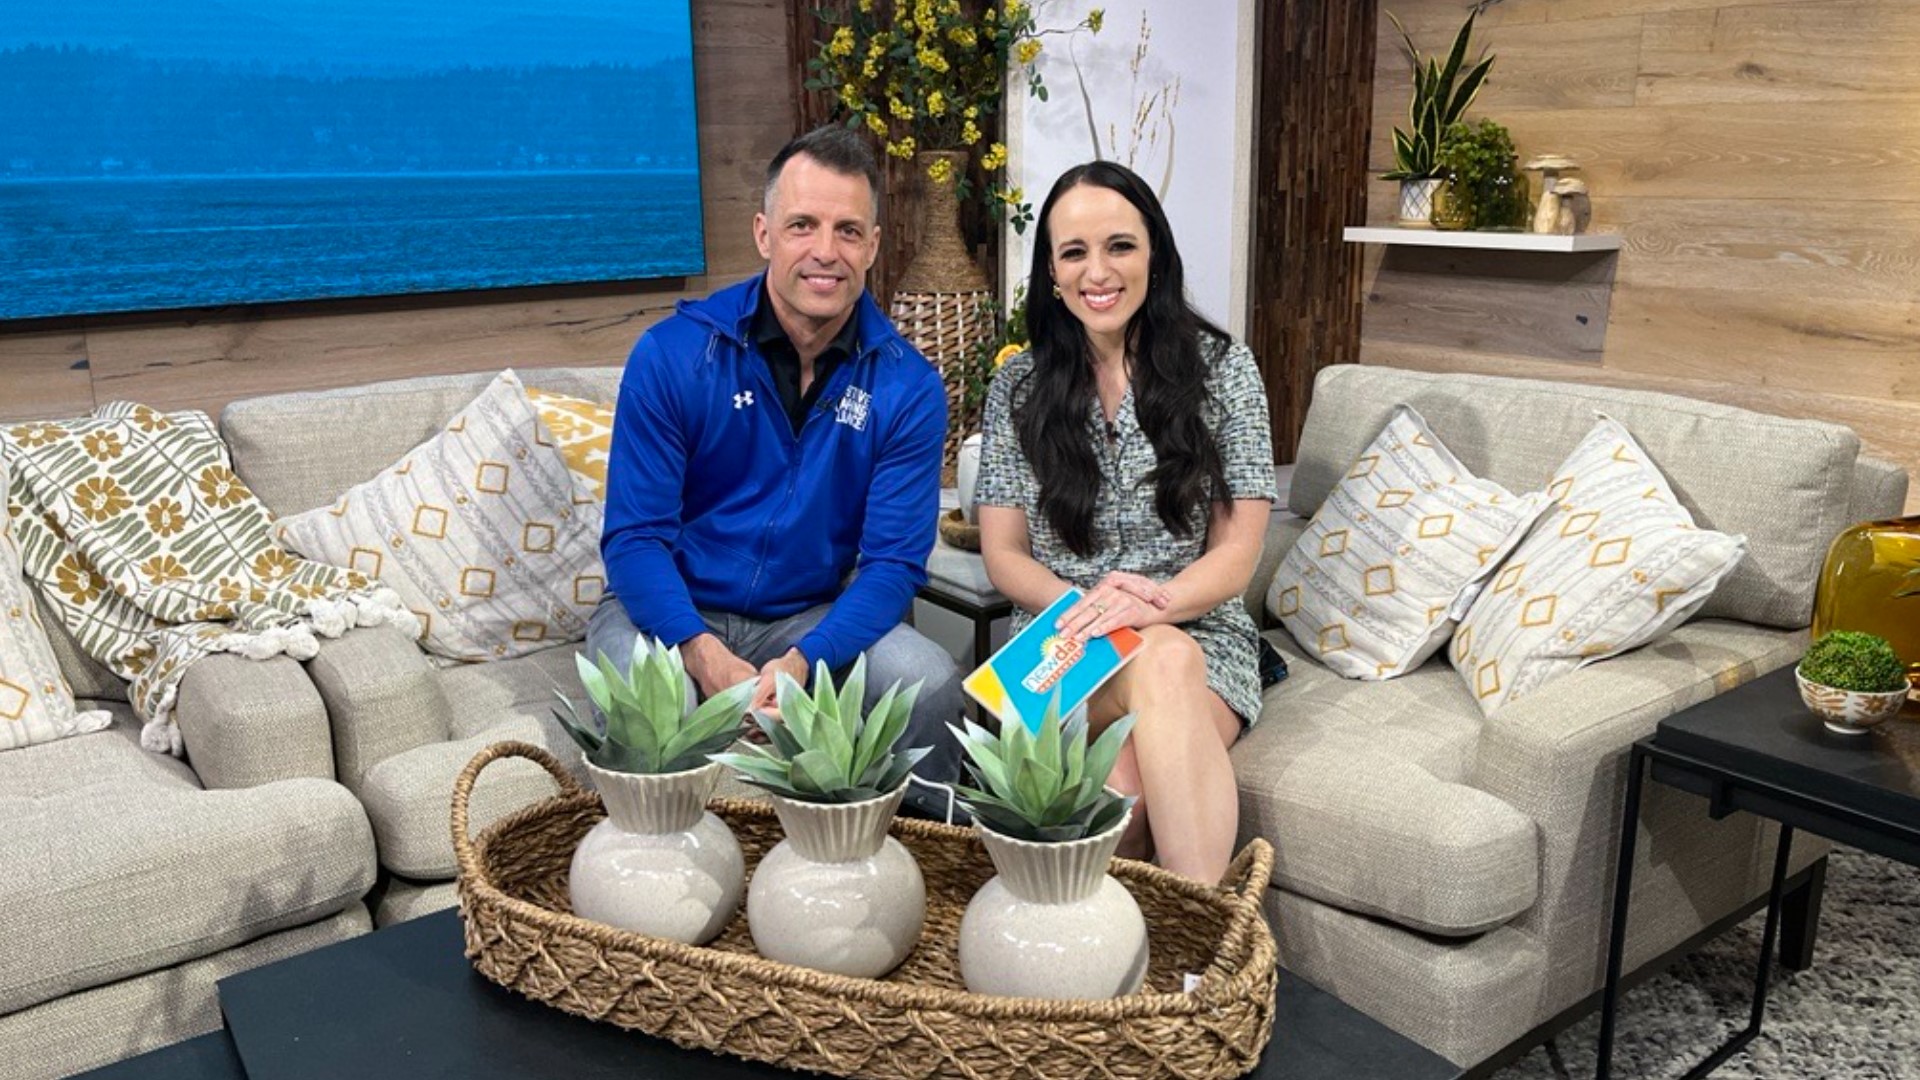 Kelly chats with former professional athlete turned corporate keynote speaker and sports dad Cletus Coffey about how to better support youth athletes. #newdaynw